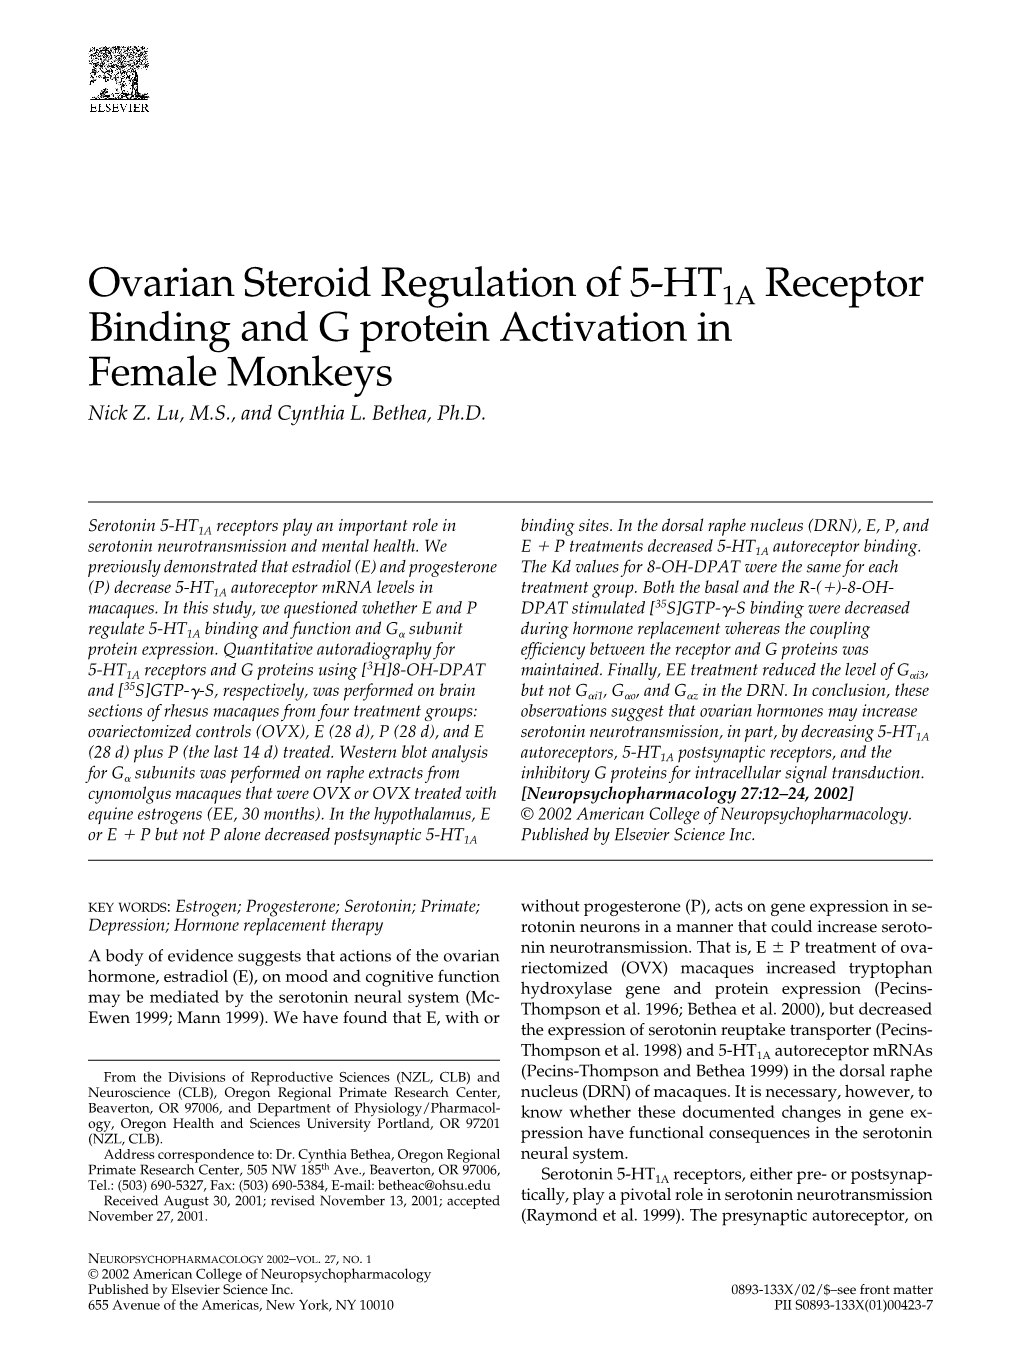 Ovarian Steroid Regulation of 5-HT1A Receptor Binding and G Protein Activation in Female Monkeys Nick Z